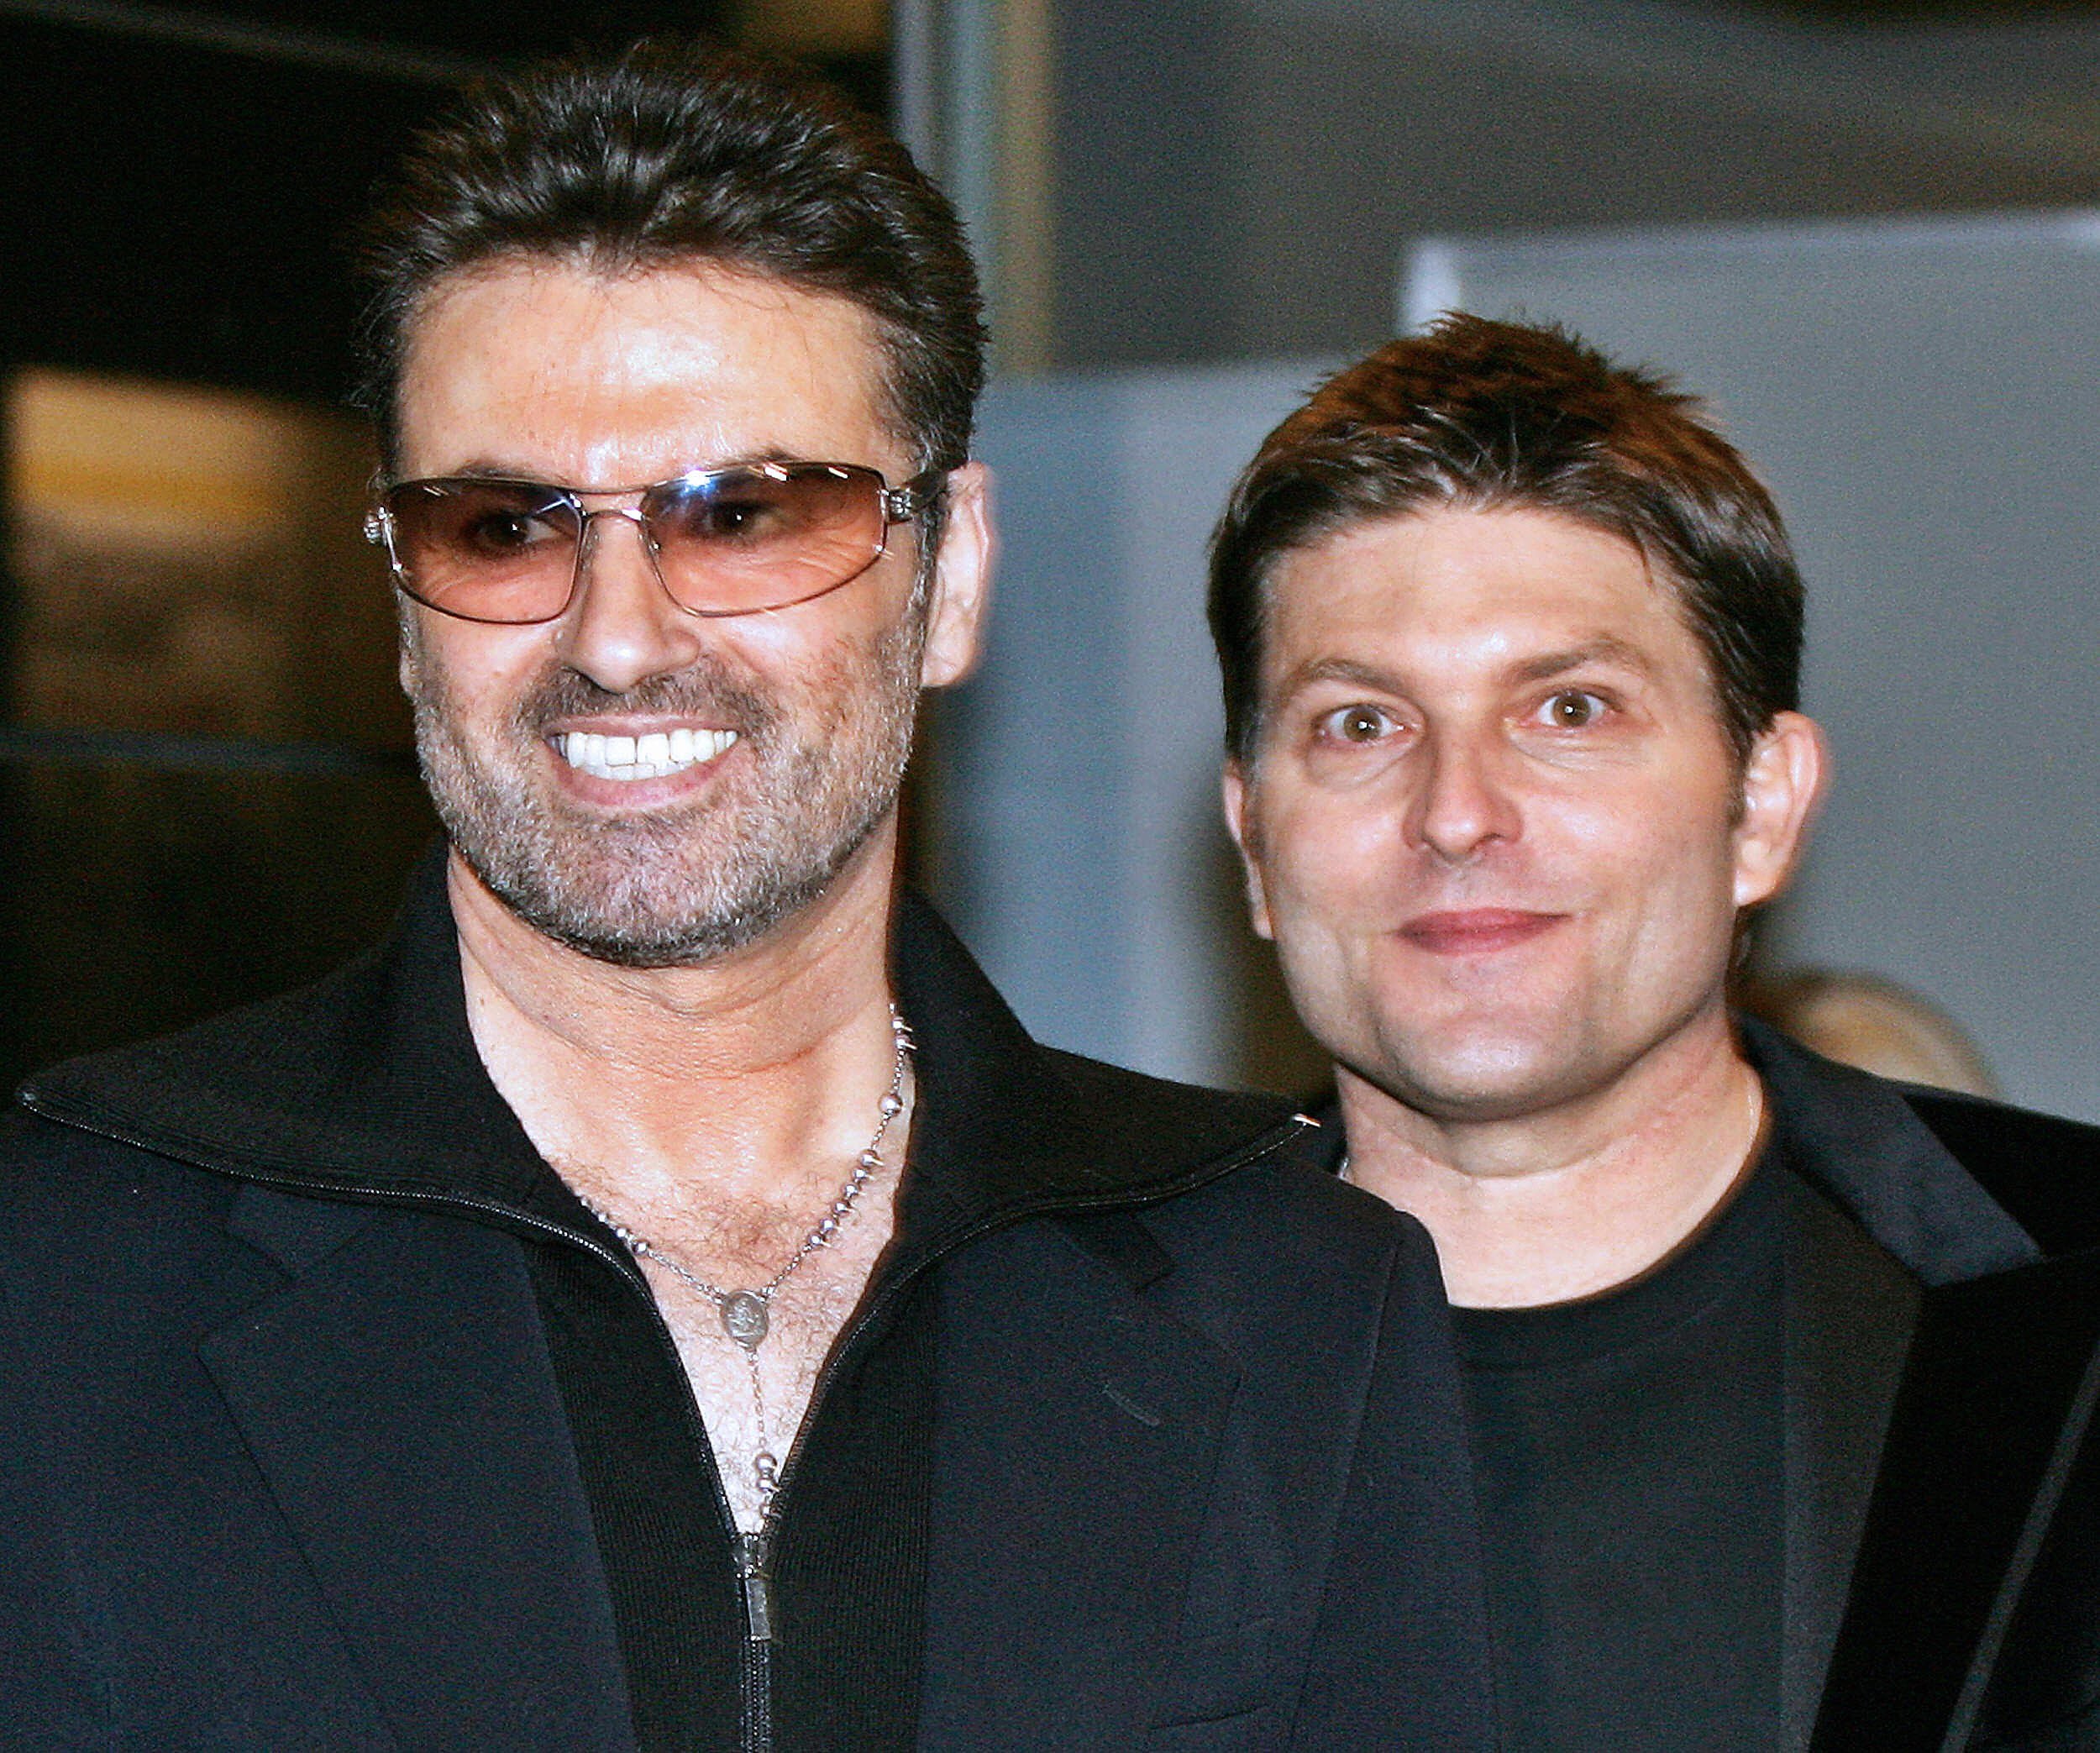 George Michael and Kenny Goss at the the Japanese Premiere of his film "A Different Story" on December 15, 2005 in Tokyo, Japan.  | Source: Getty Images